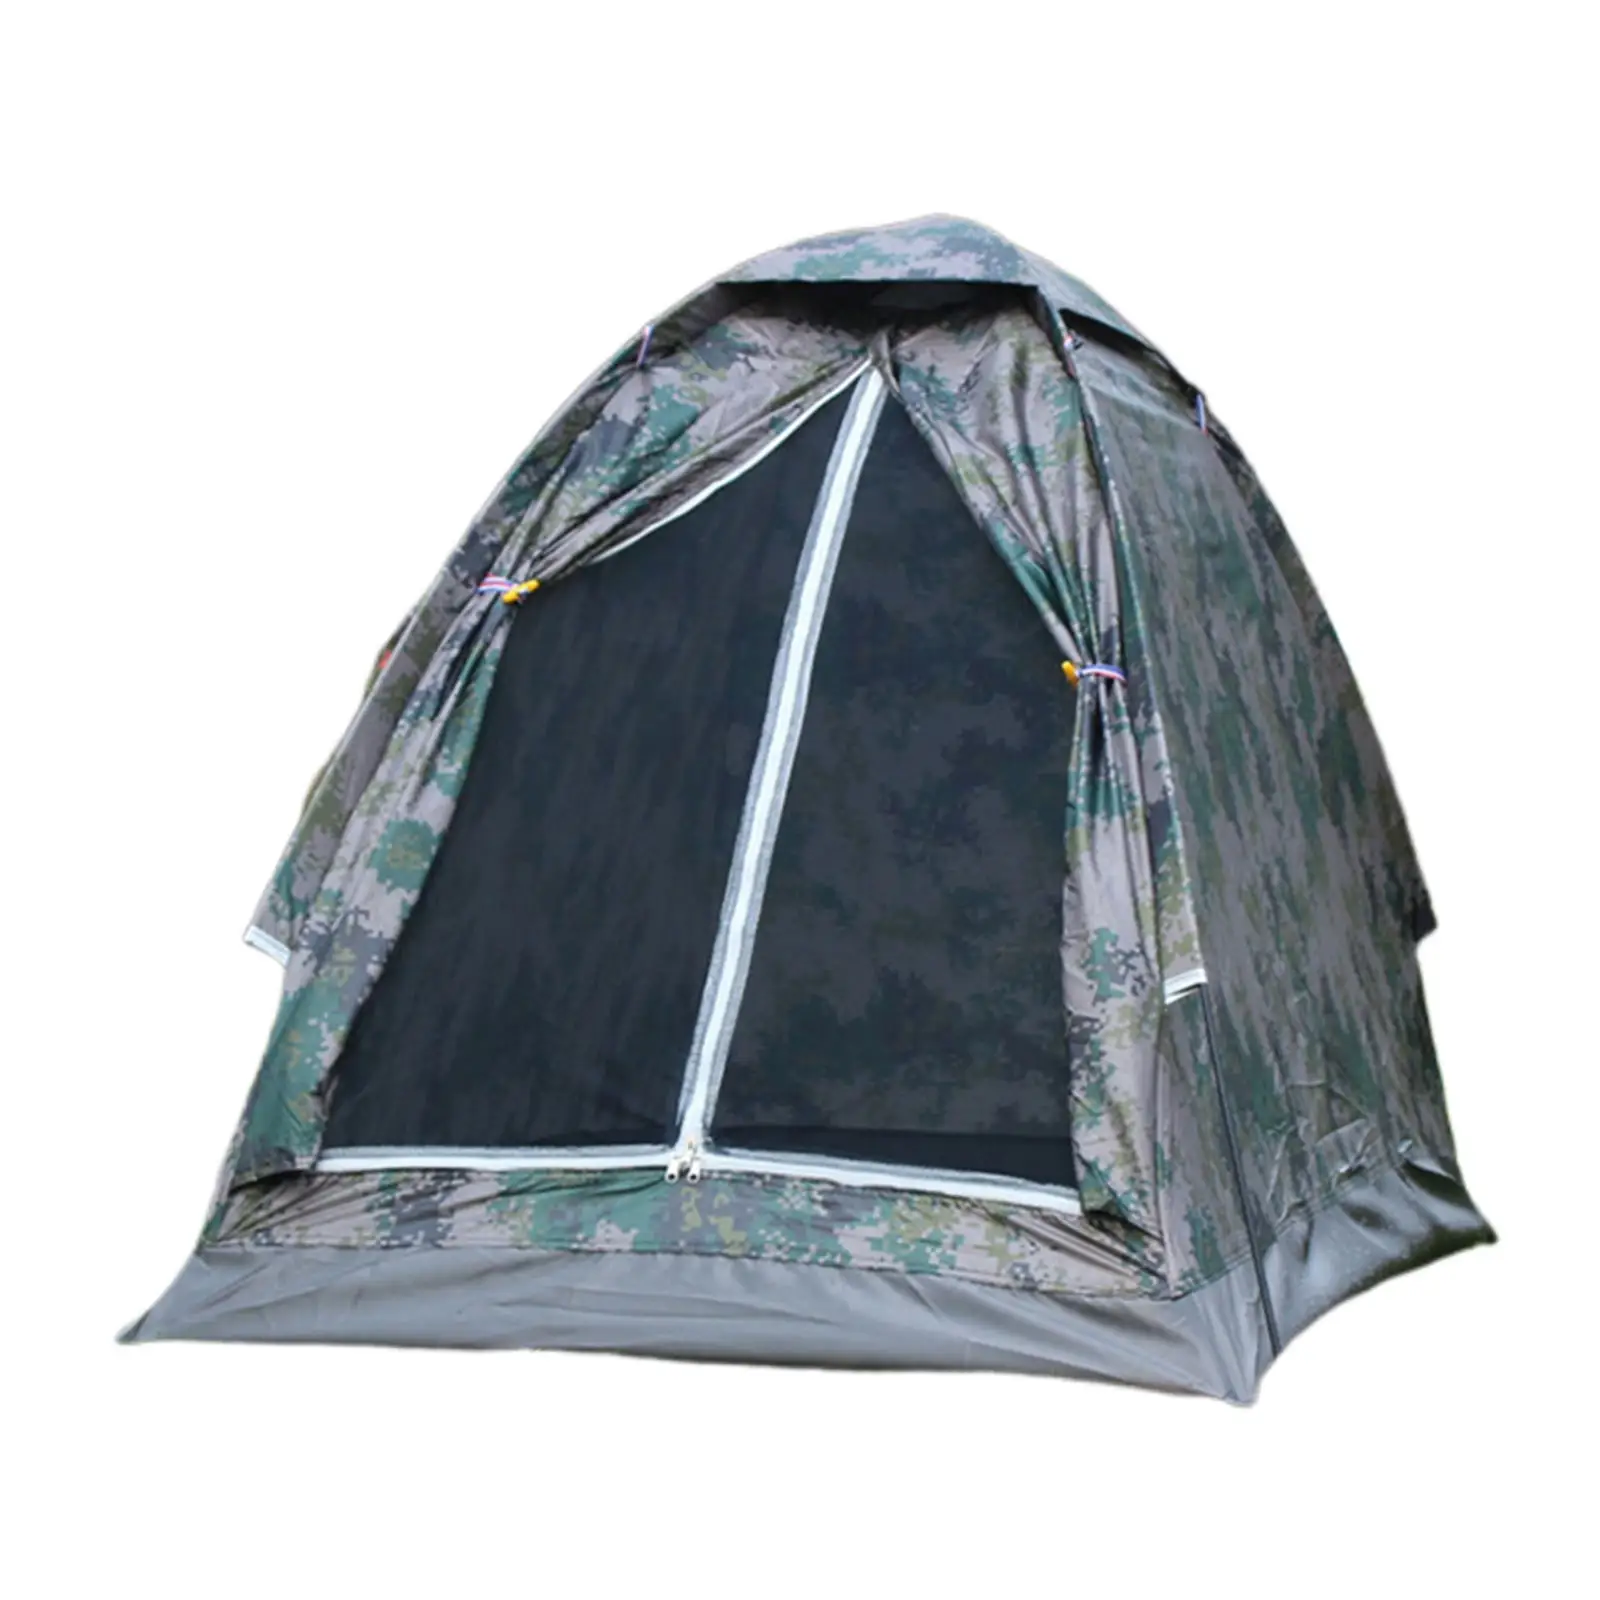 One Person Outdoor Camping Waterproof 4 Season Camouflage Hiking